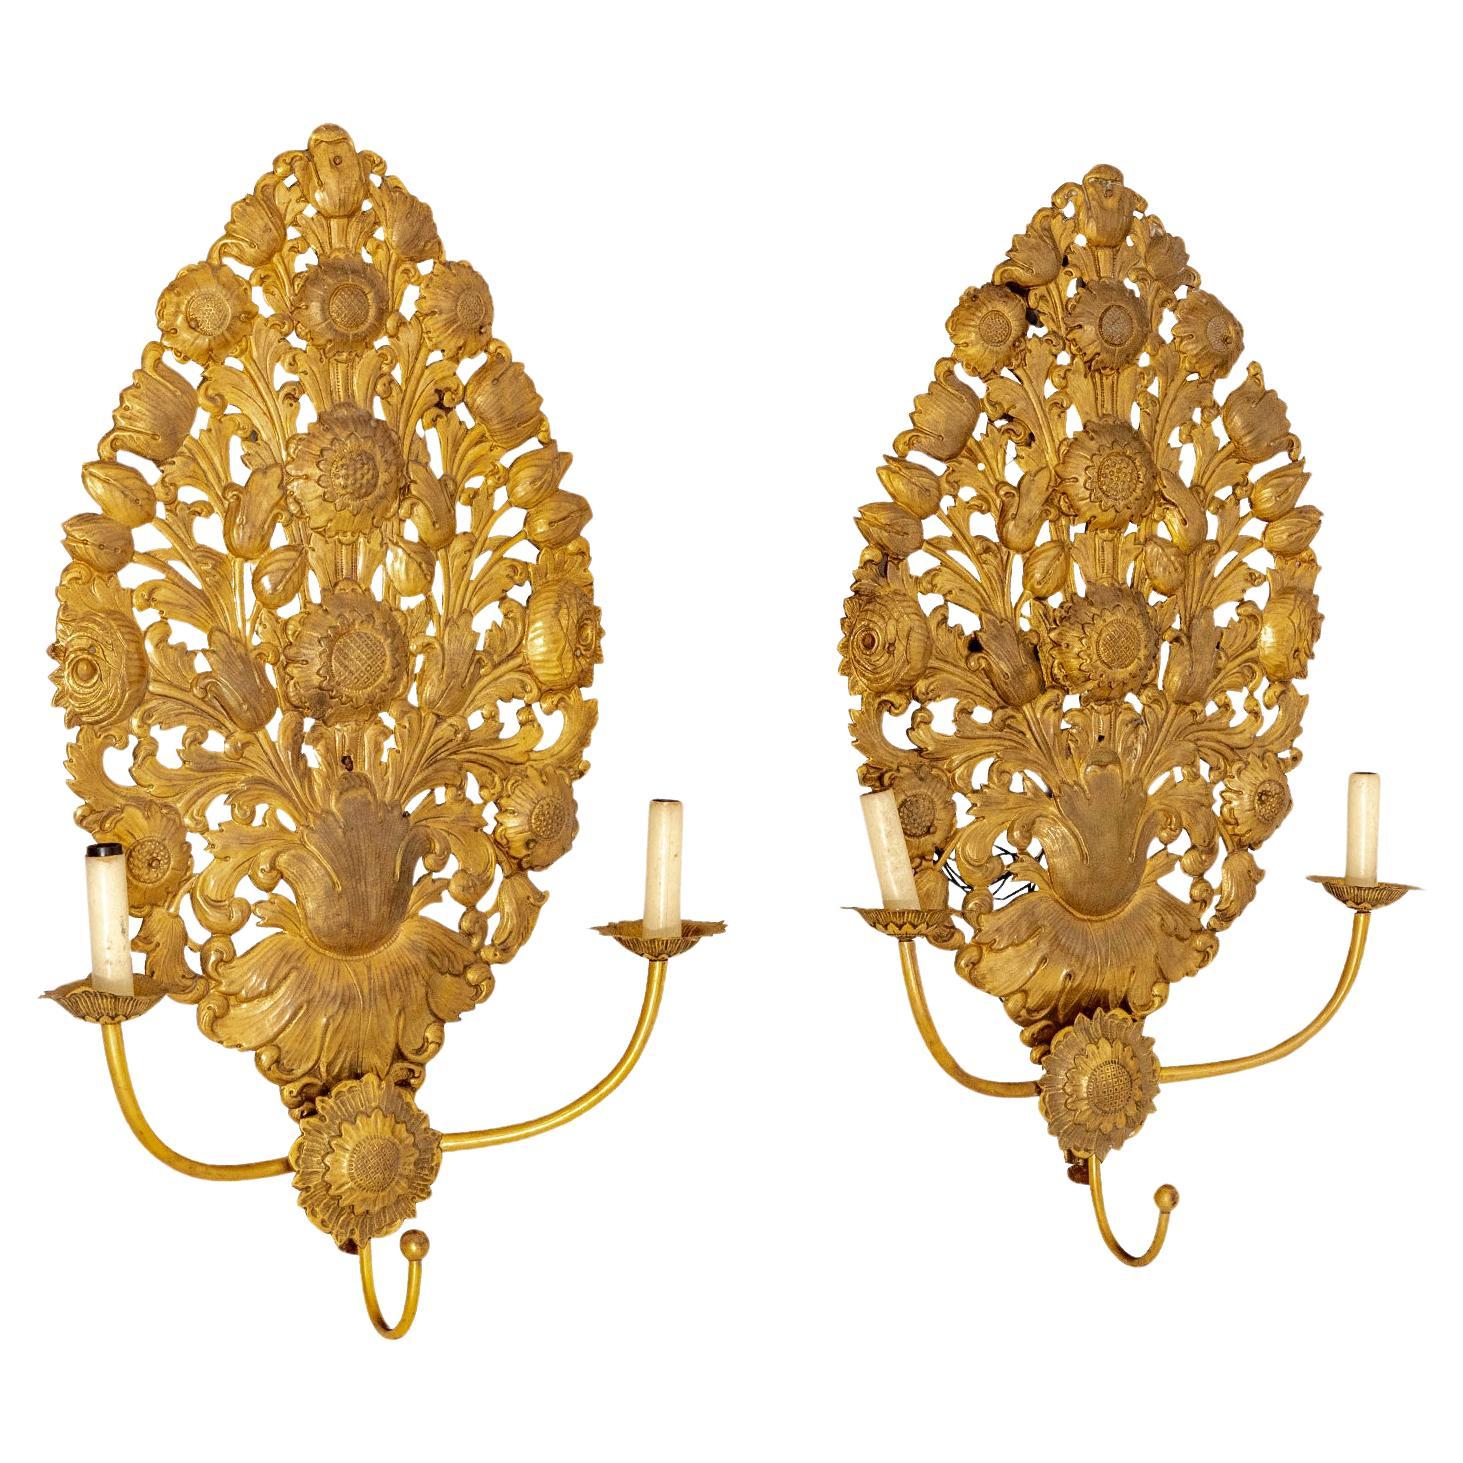 19th Century French Baroque Pair of Antique Gilded Brass Wall Appliques, Sconces For Sale